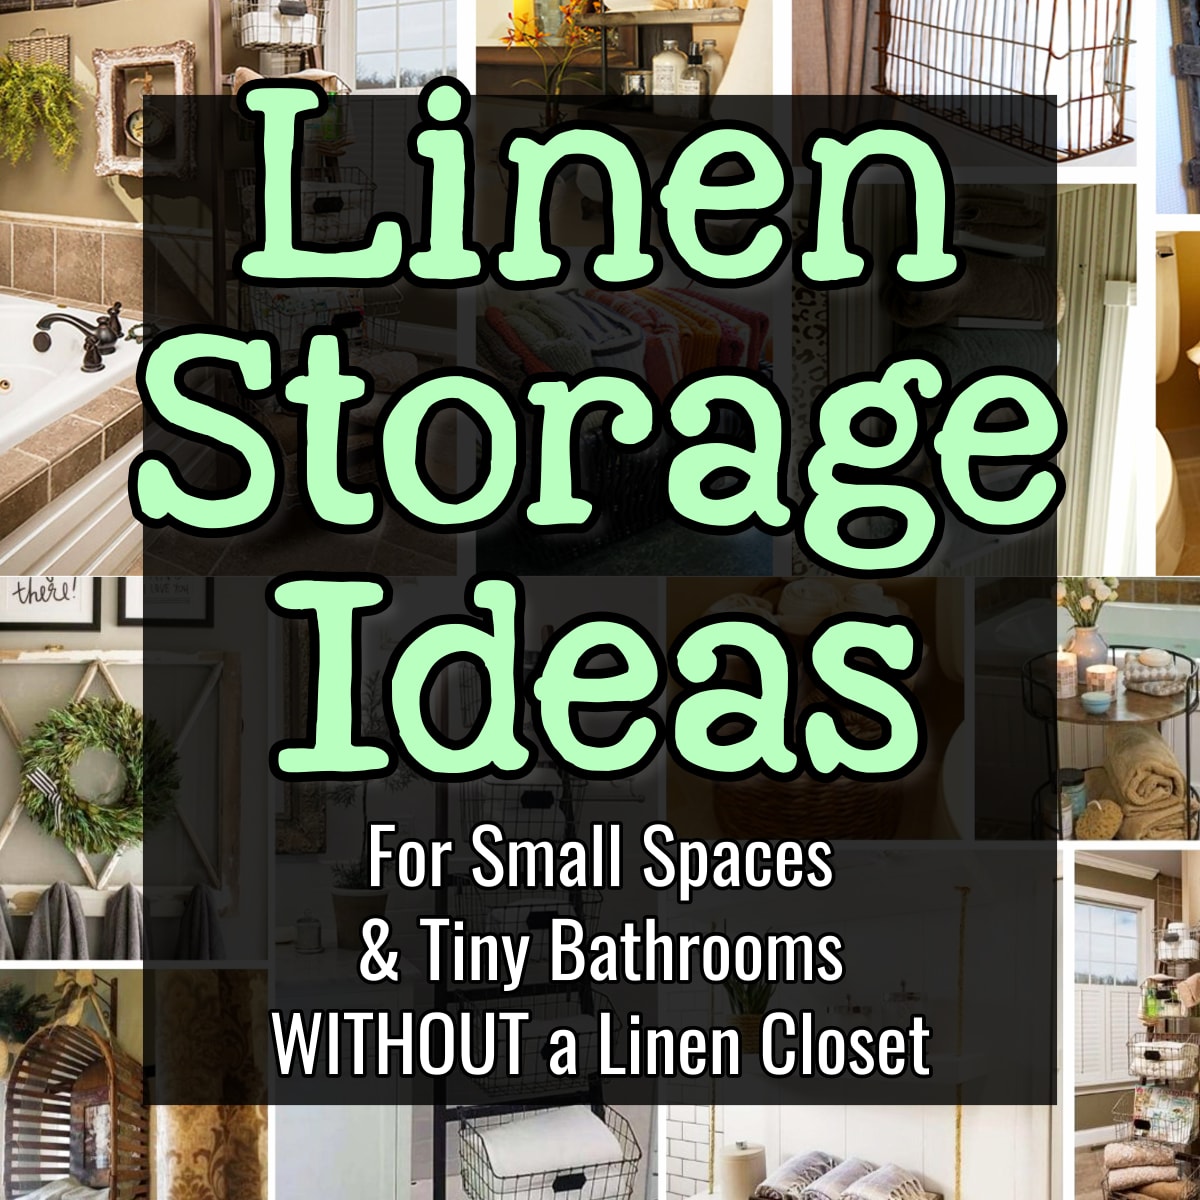 Linen Storage Ideas for Small Spaces, Tiny Bathrooms and a House WITHOUT a linen closet. No linen closet solutions and alternatives for storing towels, bed linens and bedding